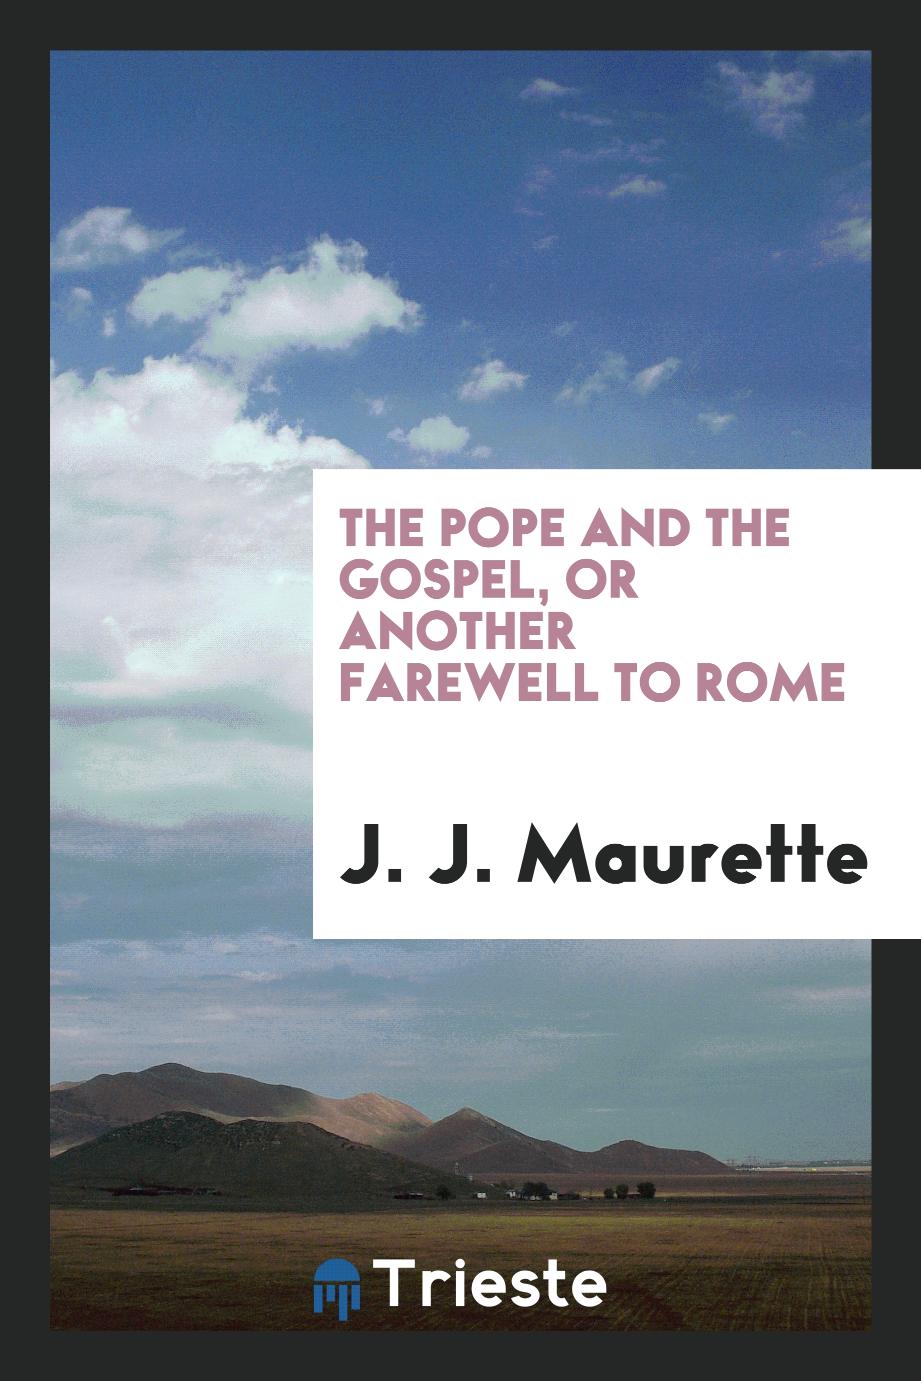 The Pope and the Gospel, or Another Farewell to Rome